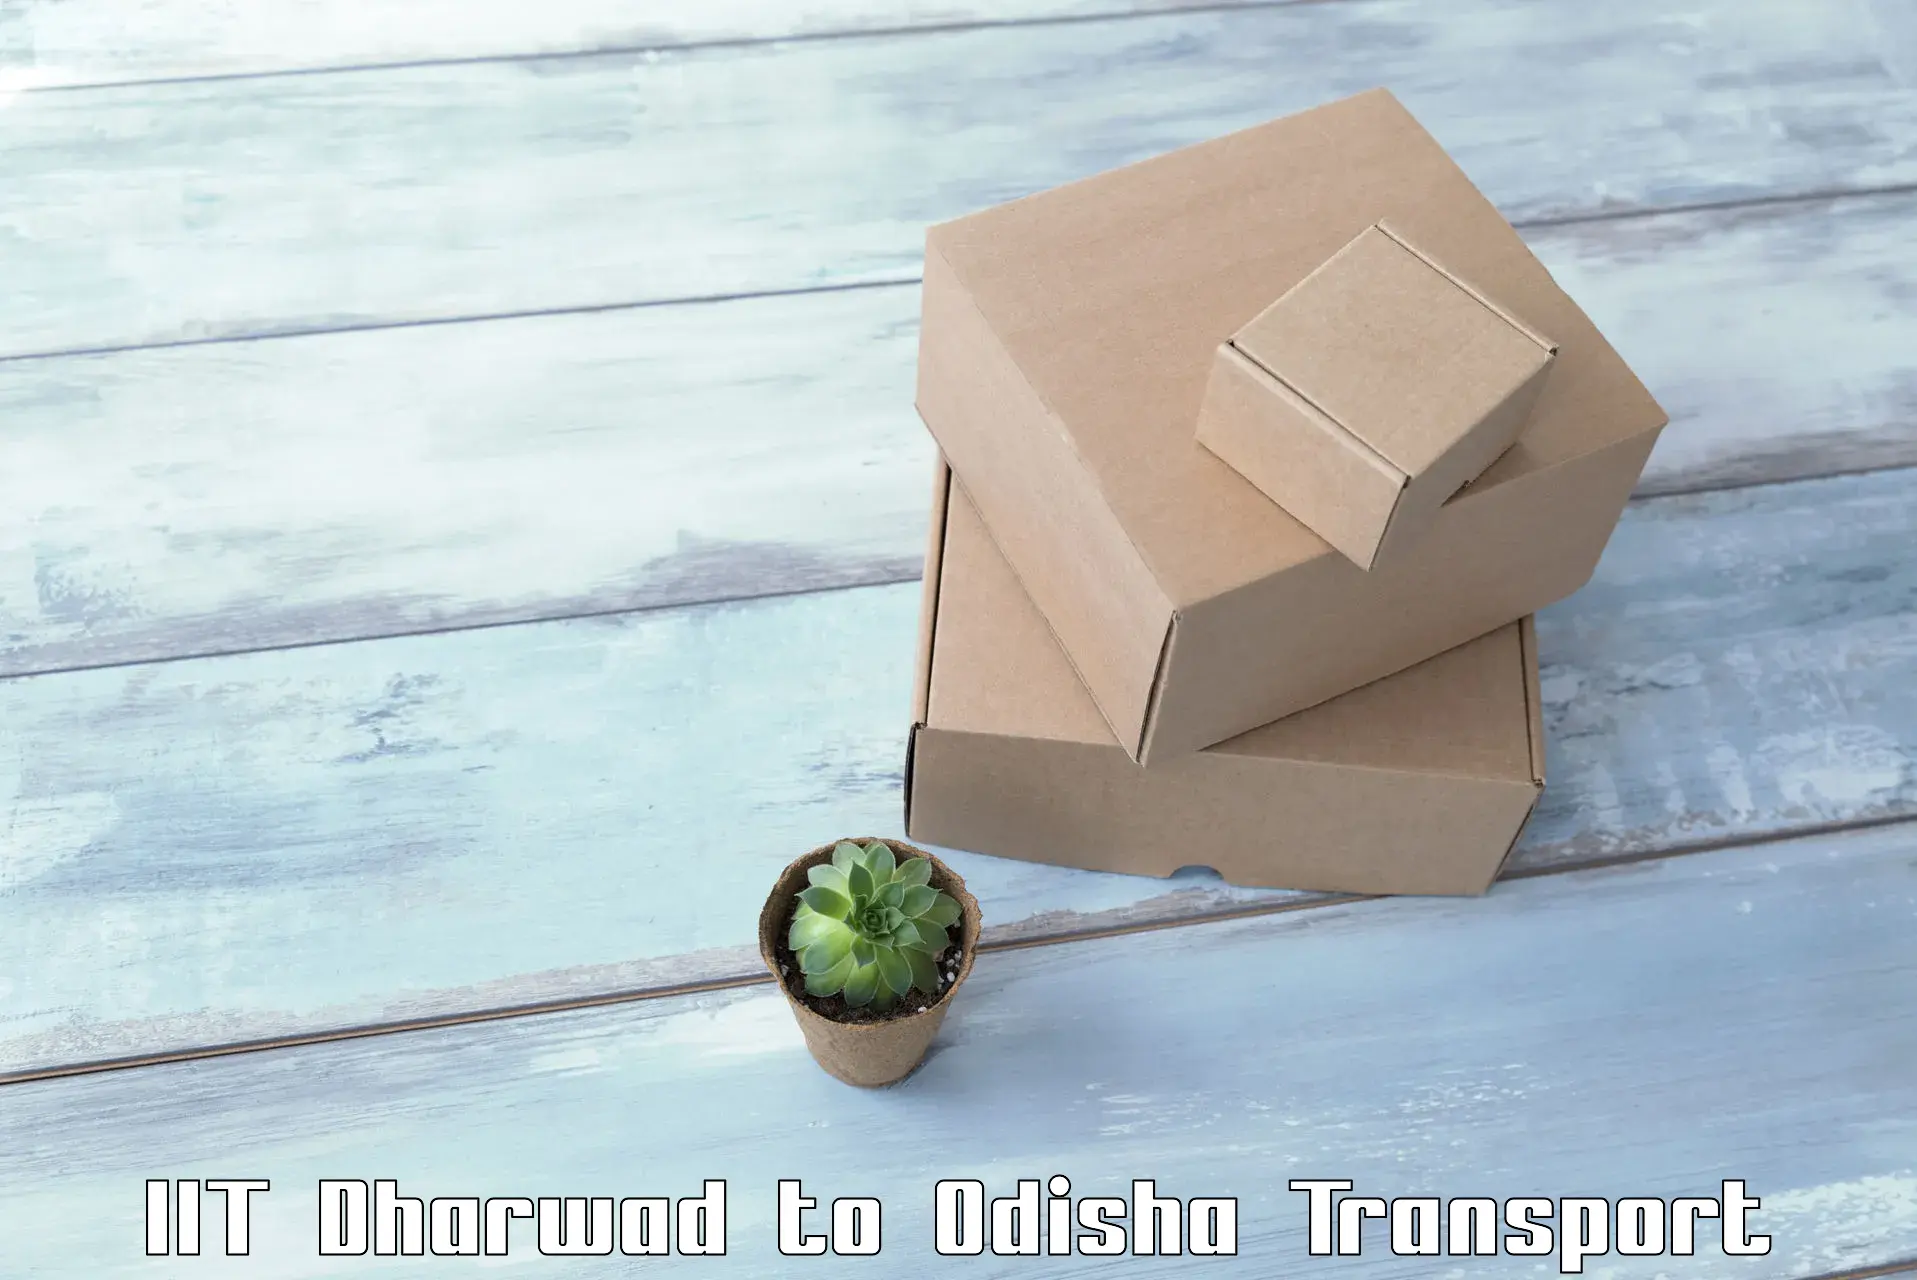 Road transport online services IIT Dharwad to Chandikhol